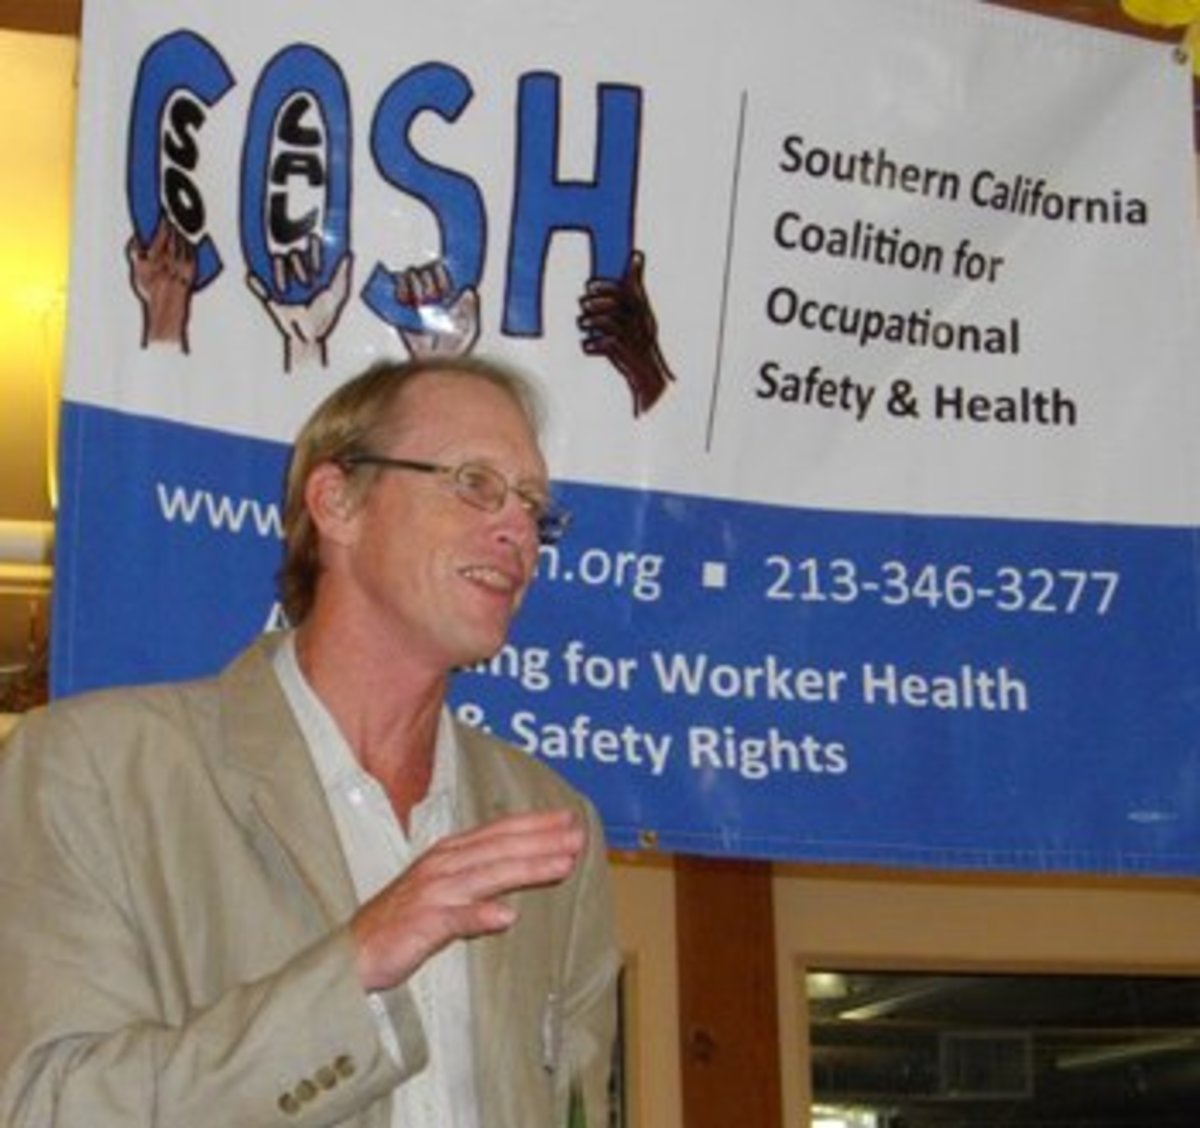 Tom O'Connor, executive director of the national Council for Occupational Safety and Health